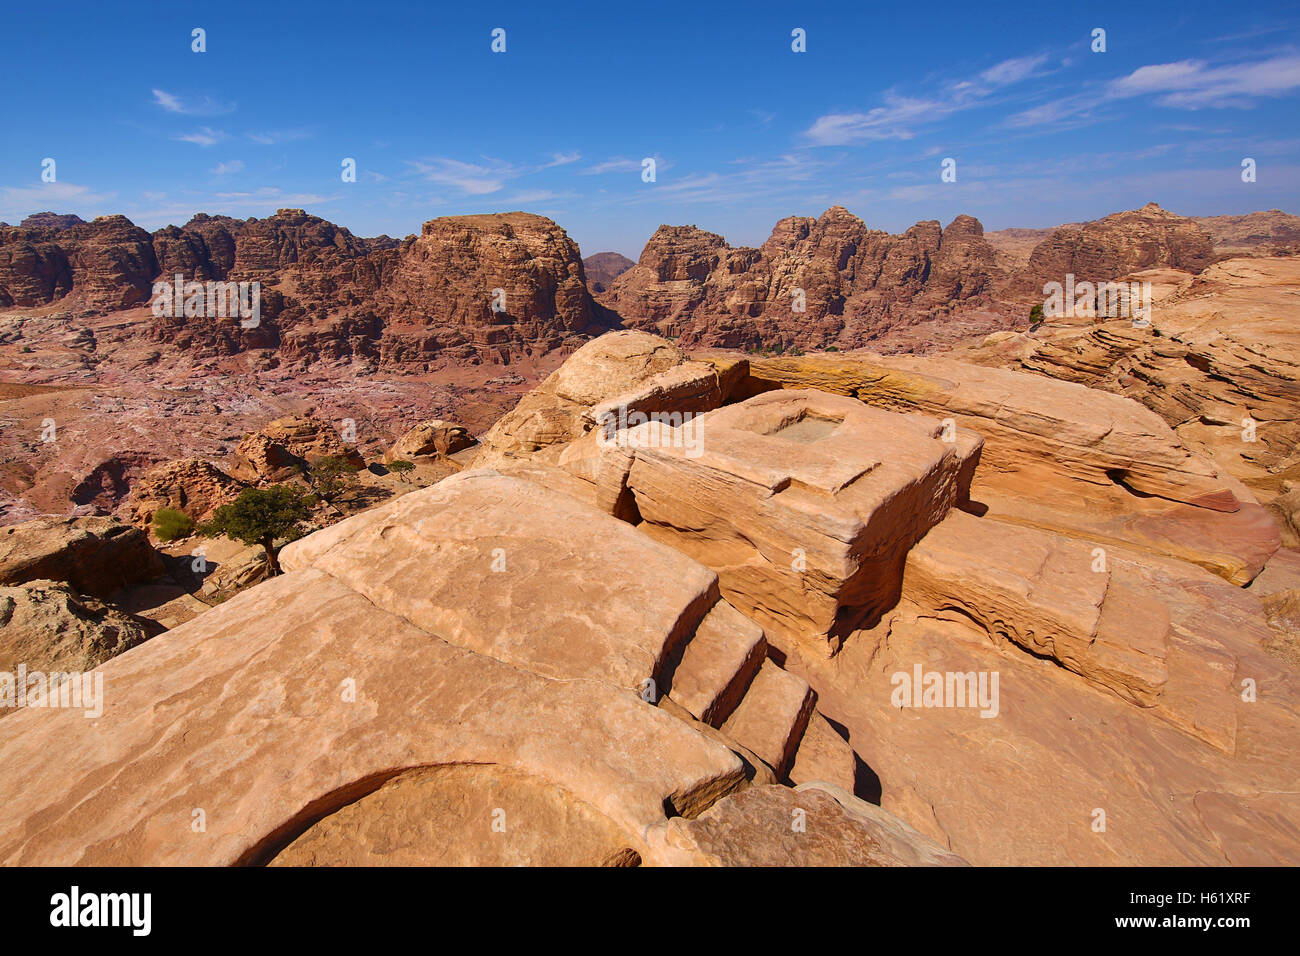 The High Place of Sacrifice overlooking the valley of the rock city of Petra, Jordan Stock Photo